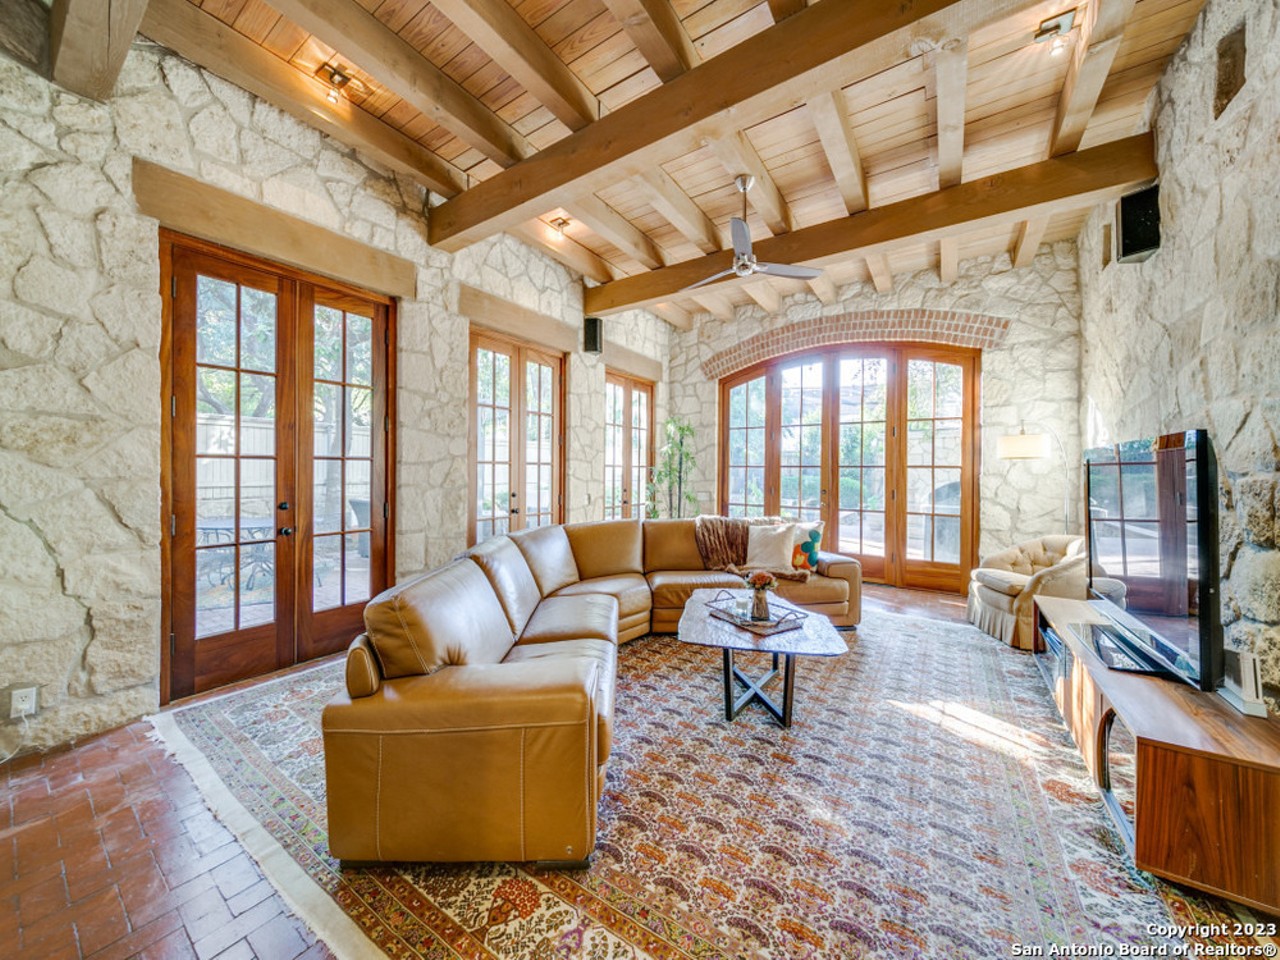 A 1934 stone-exterior home for sale in Olmos park has been owned by two doctors